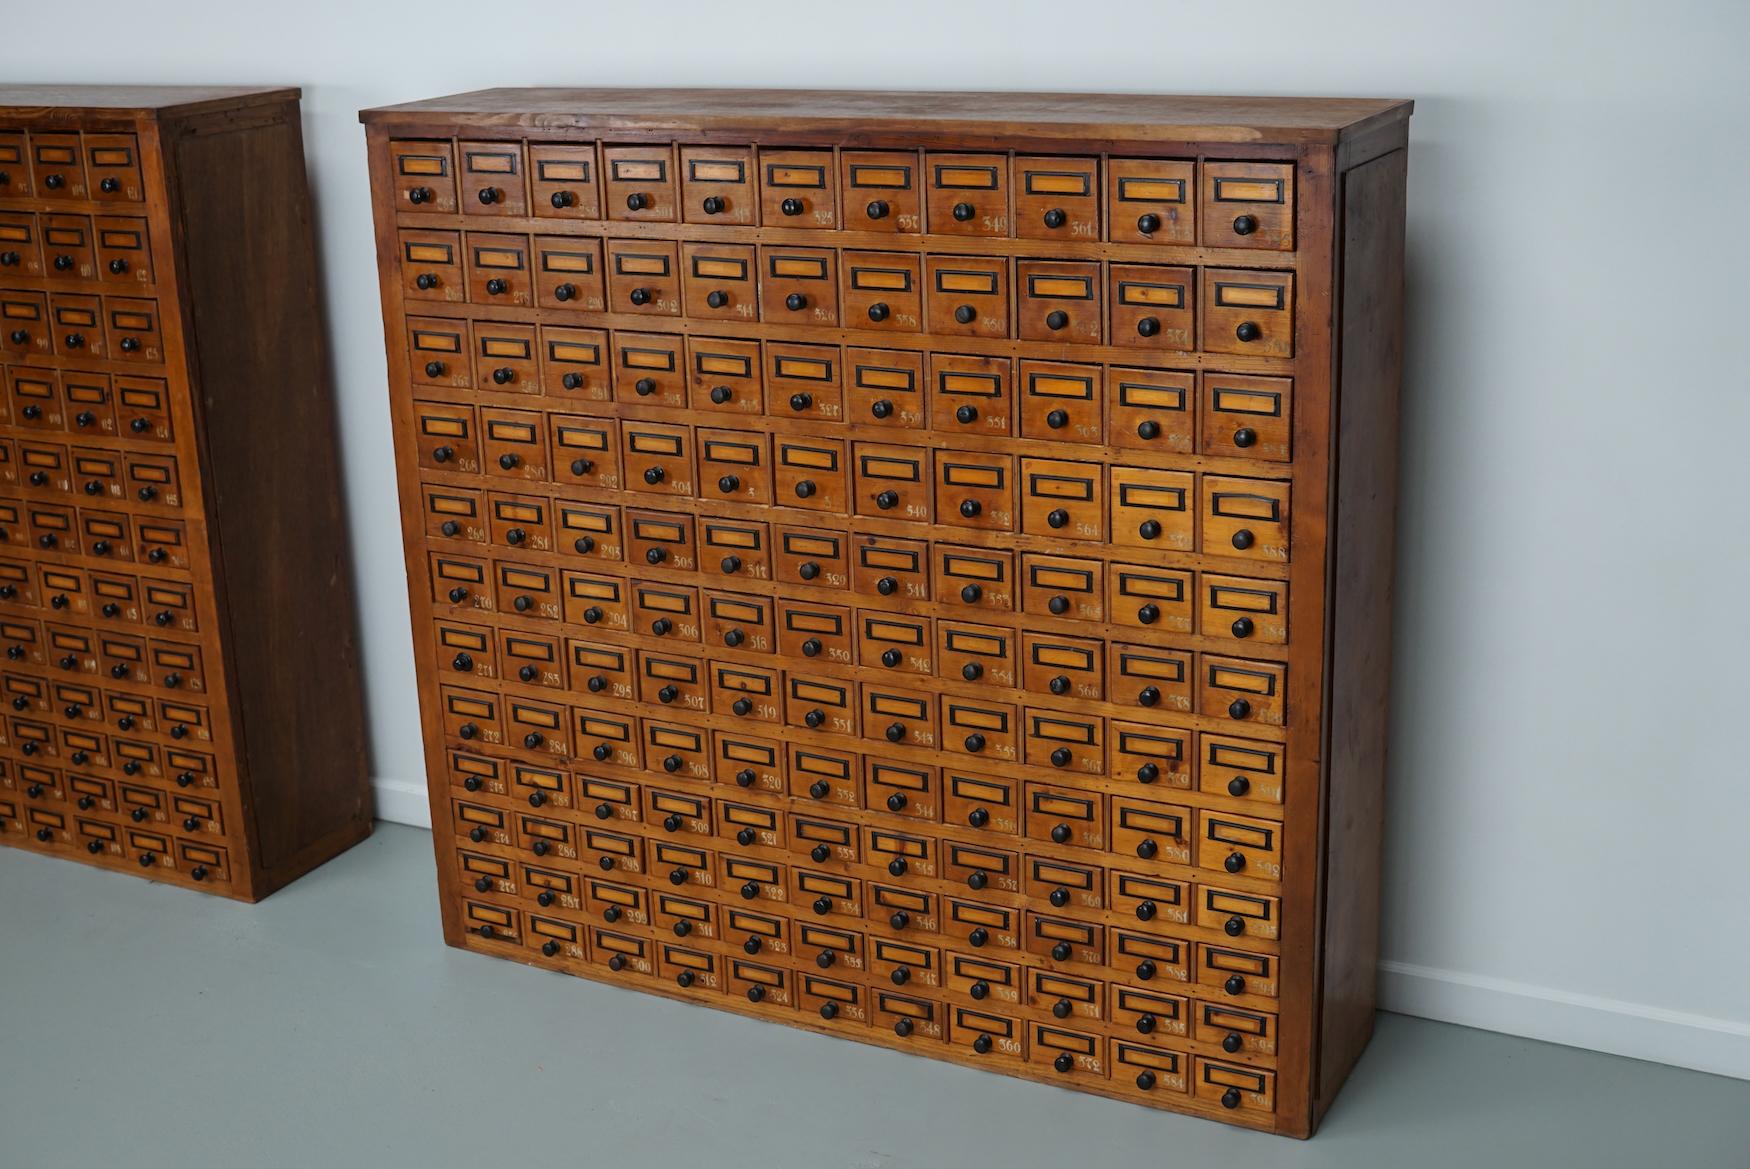 This workshop cabinet was made from pine in the Netherlands circa 1930s and it was used in a workshop for dentist equipment. It features many drawers with small knobs and name card holders. The interior dimensions of the drawers are: DWH 25 x 8 x 8,